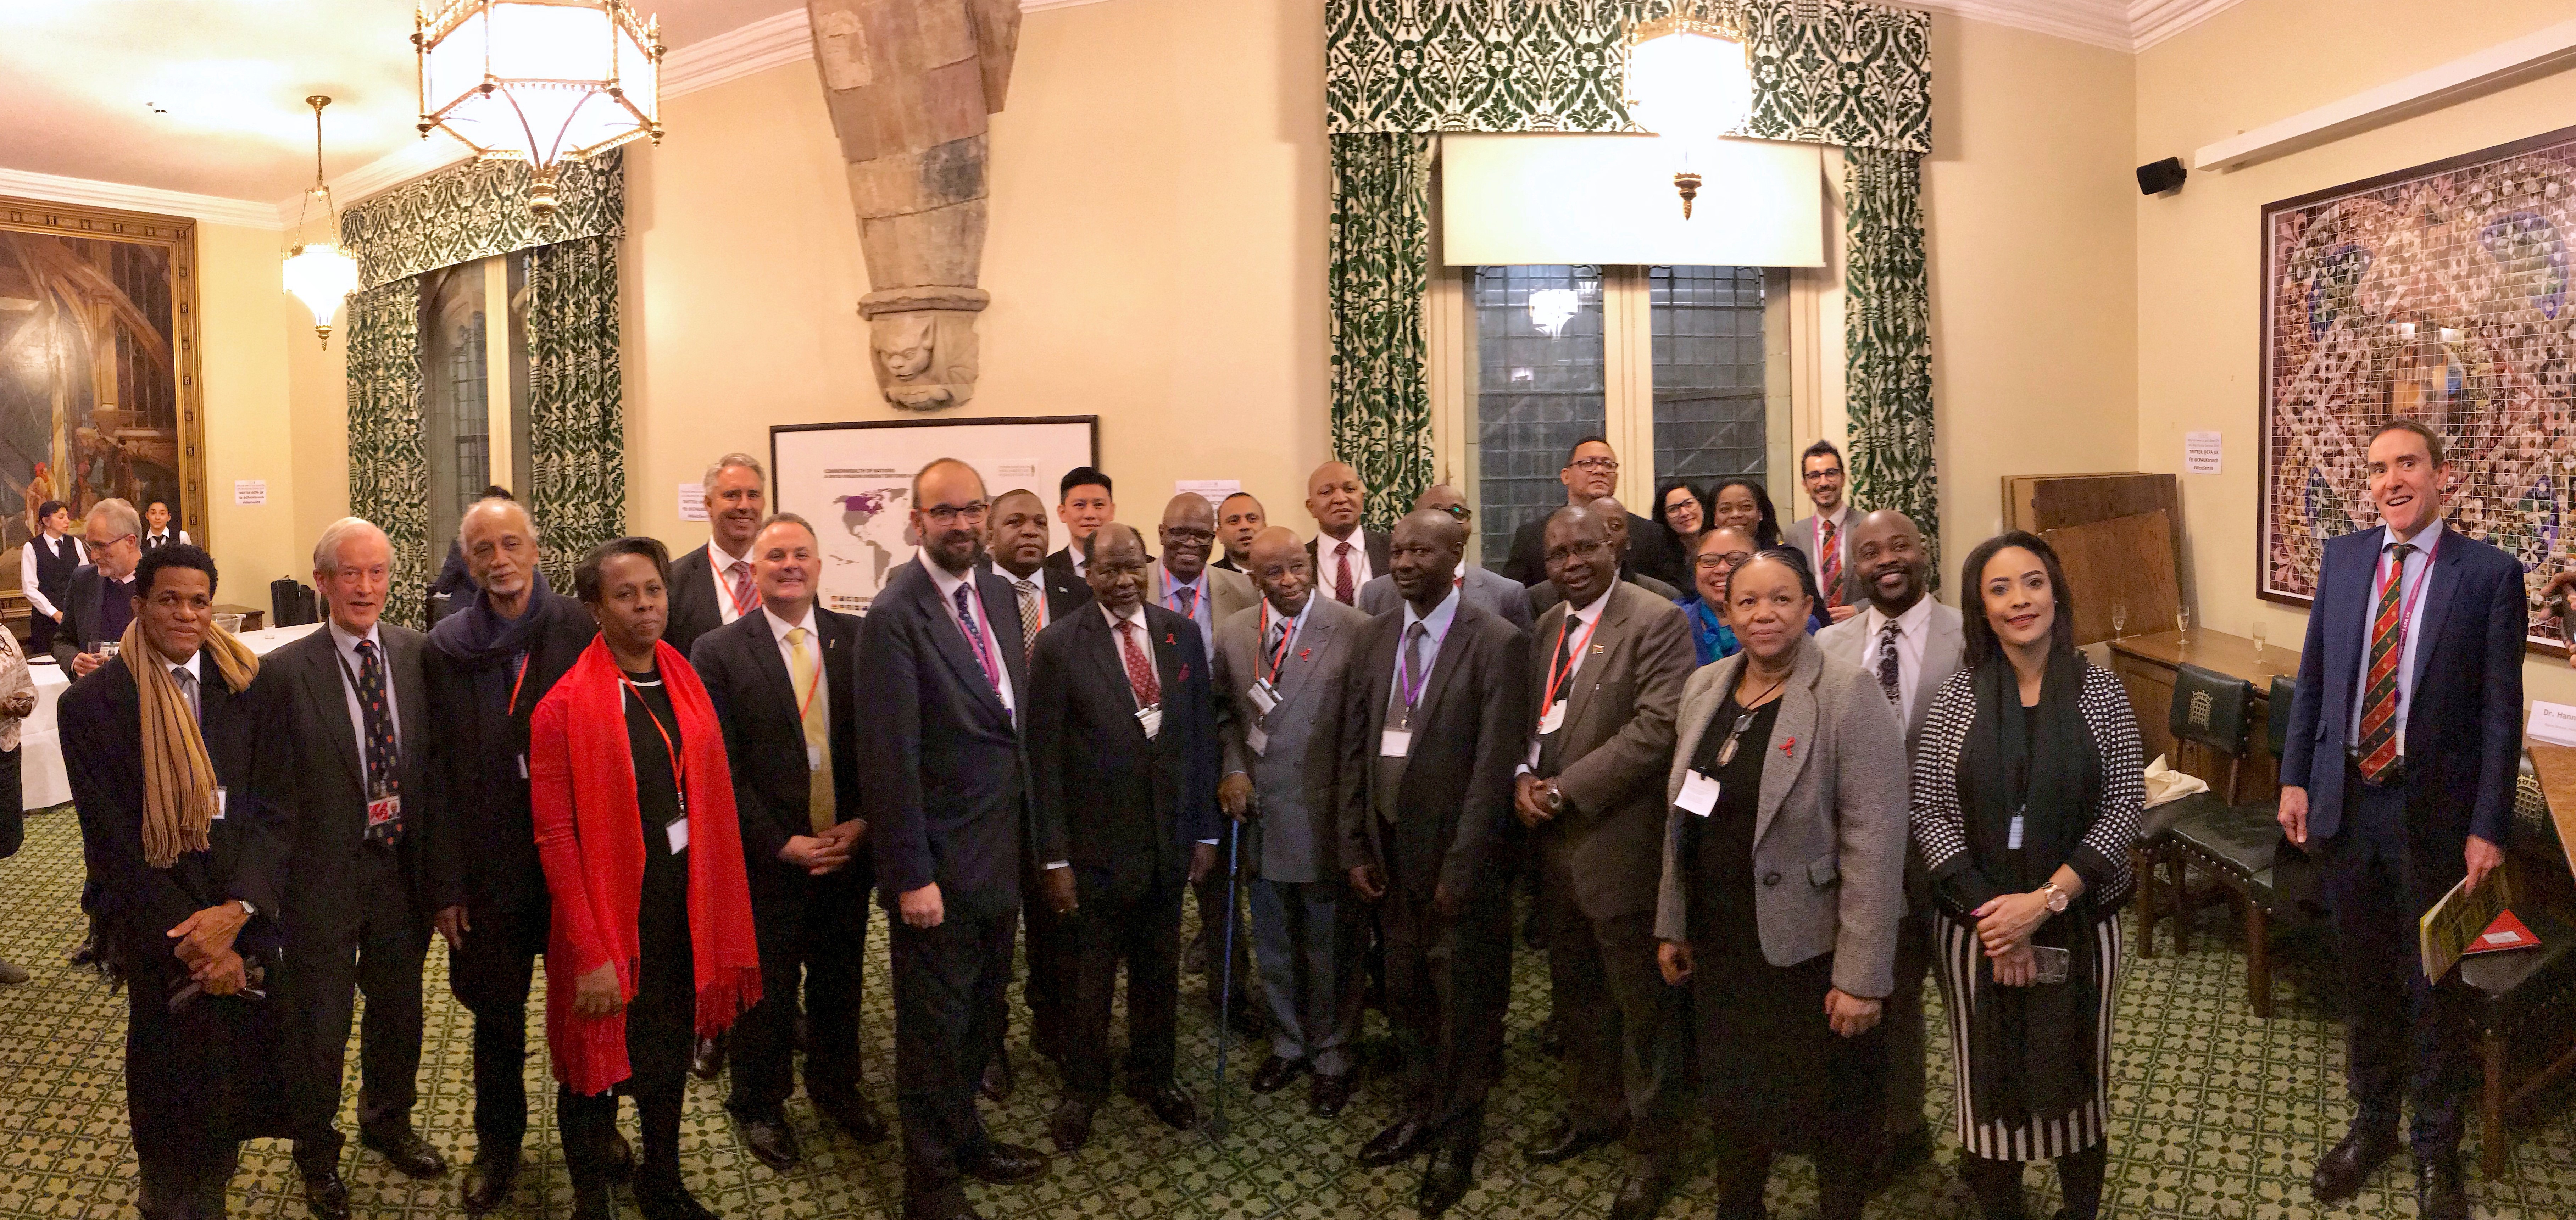 Group photo with HE Festus Mogae, Former President of Botswana, and HE Joaquim Chissano, Former President of  Mozambique